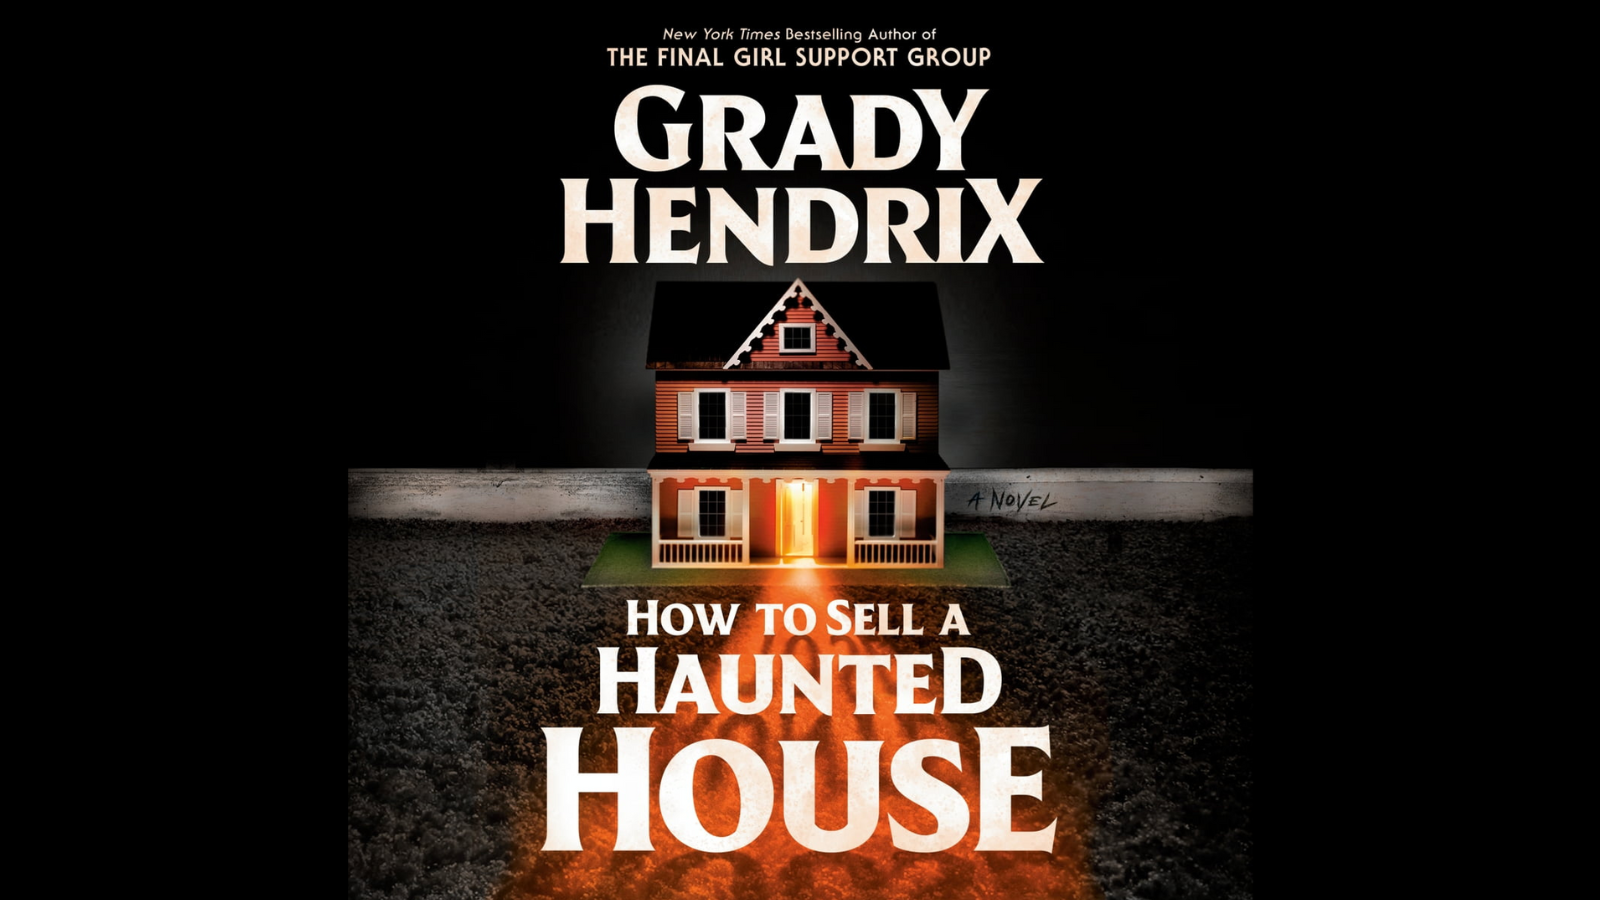 Grady Hendrix's 'How to Sell a Haunted House' to get film adaptation